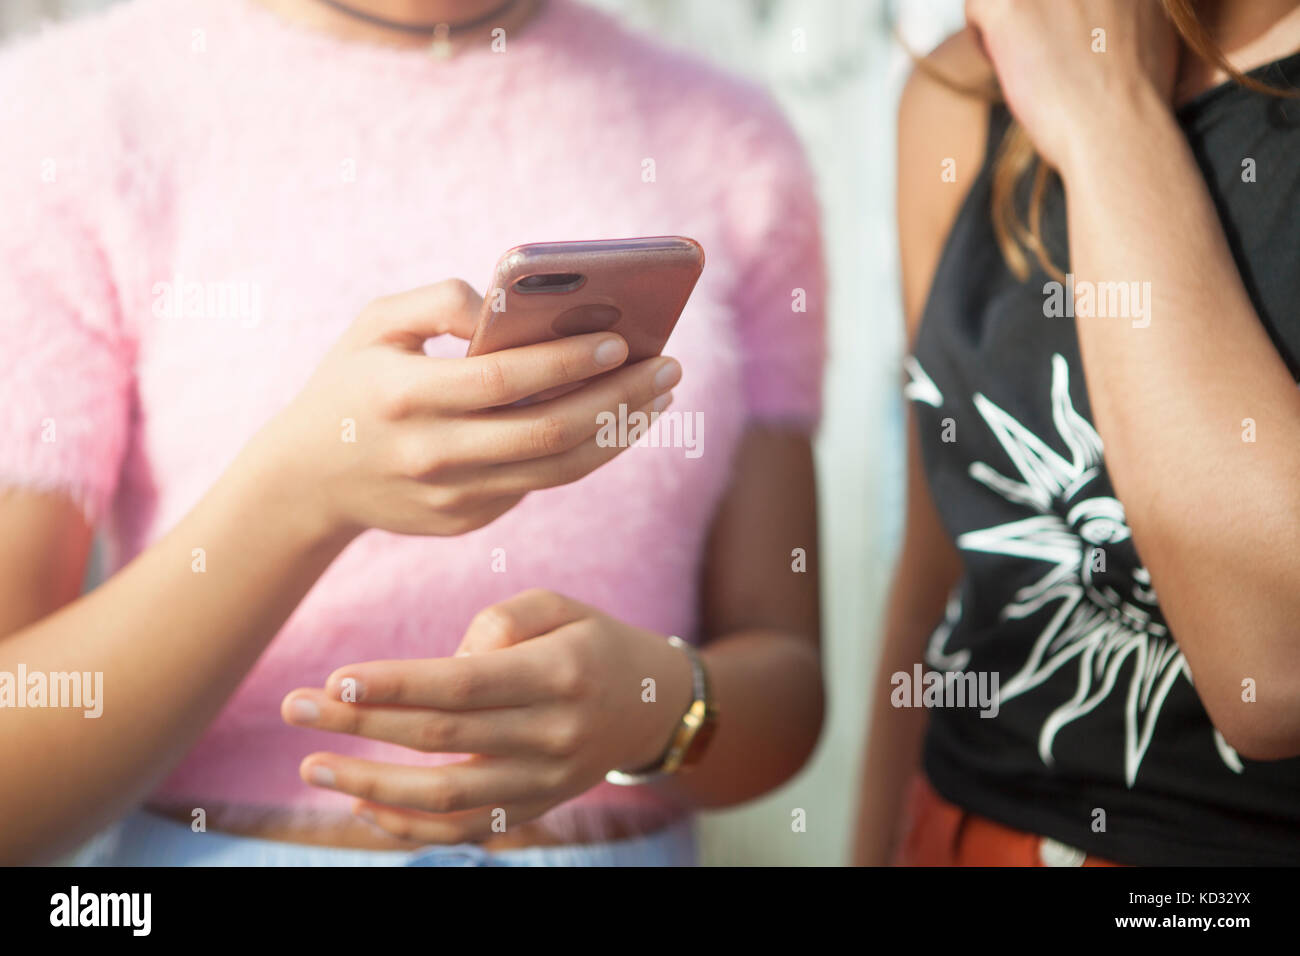 Two young women in street, looking at smartphone, mid section Stock Photo